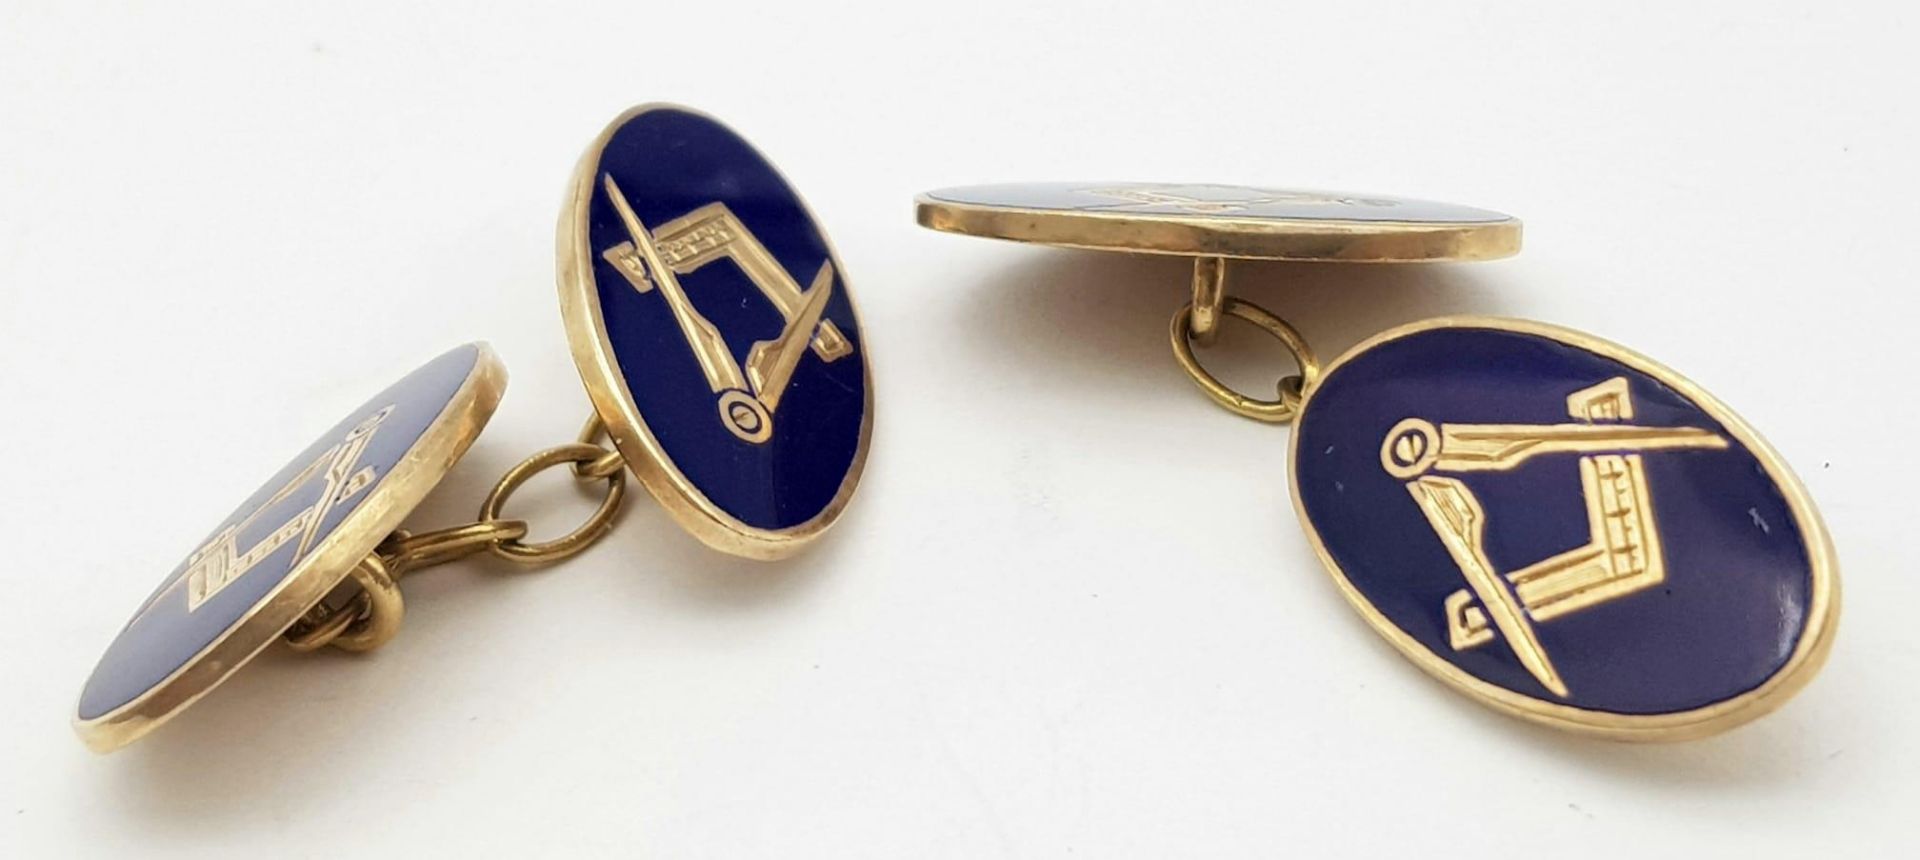 A Pair of Vintage 9K and Blue Enamel 'Masonic' Cufflinks. 9.5g total weight. - Image 2 of 4